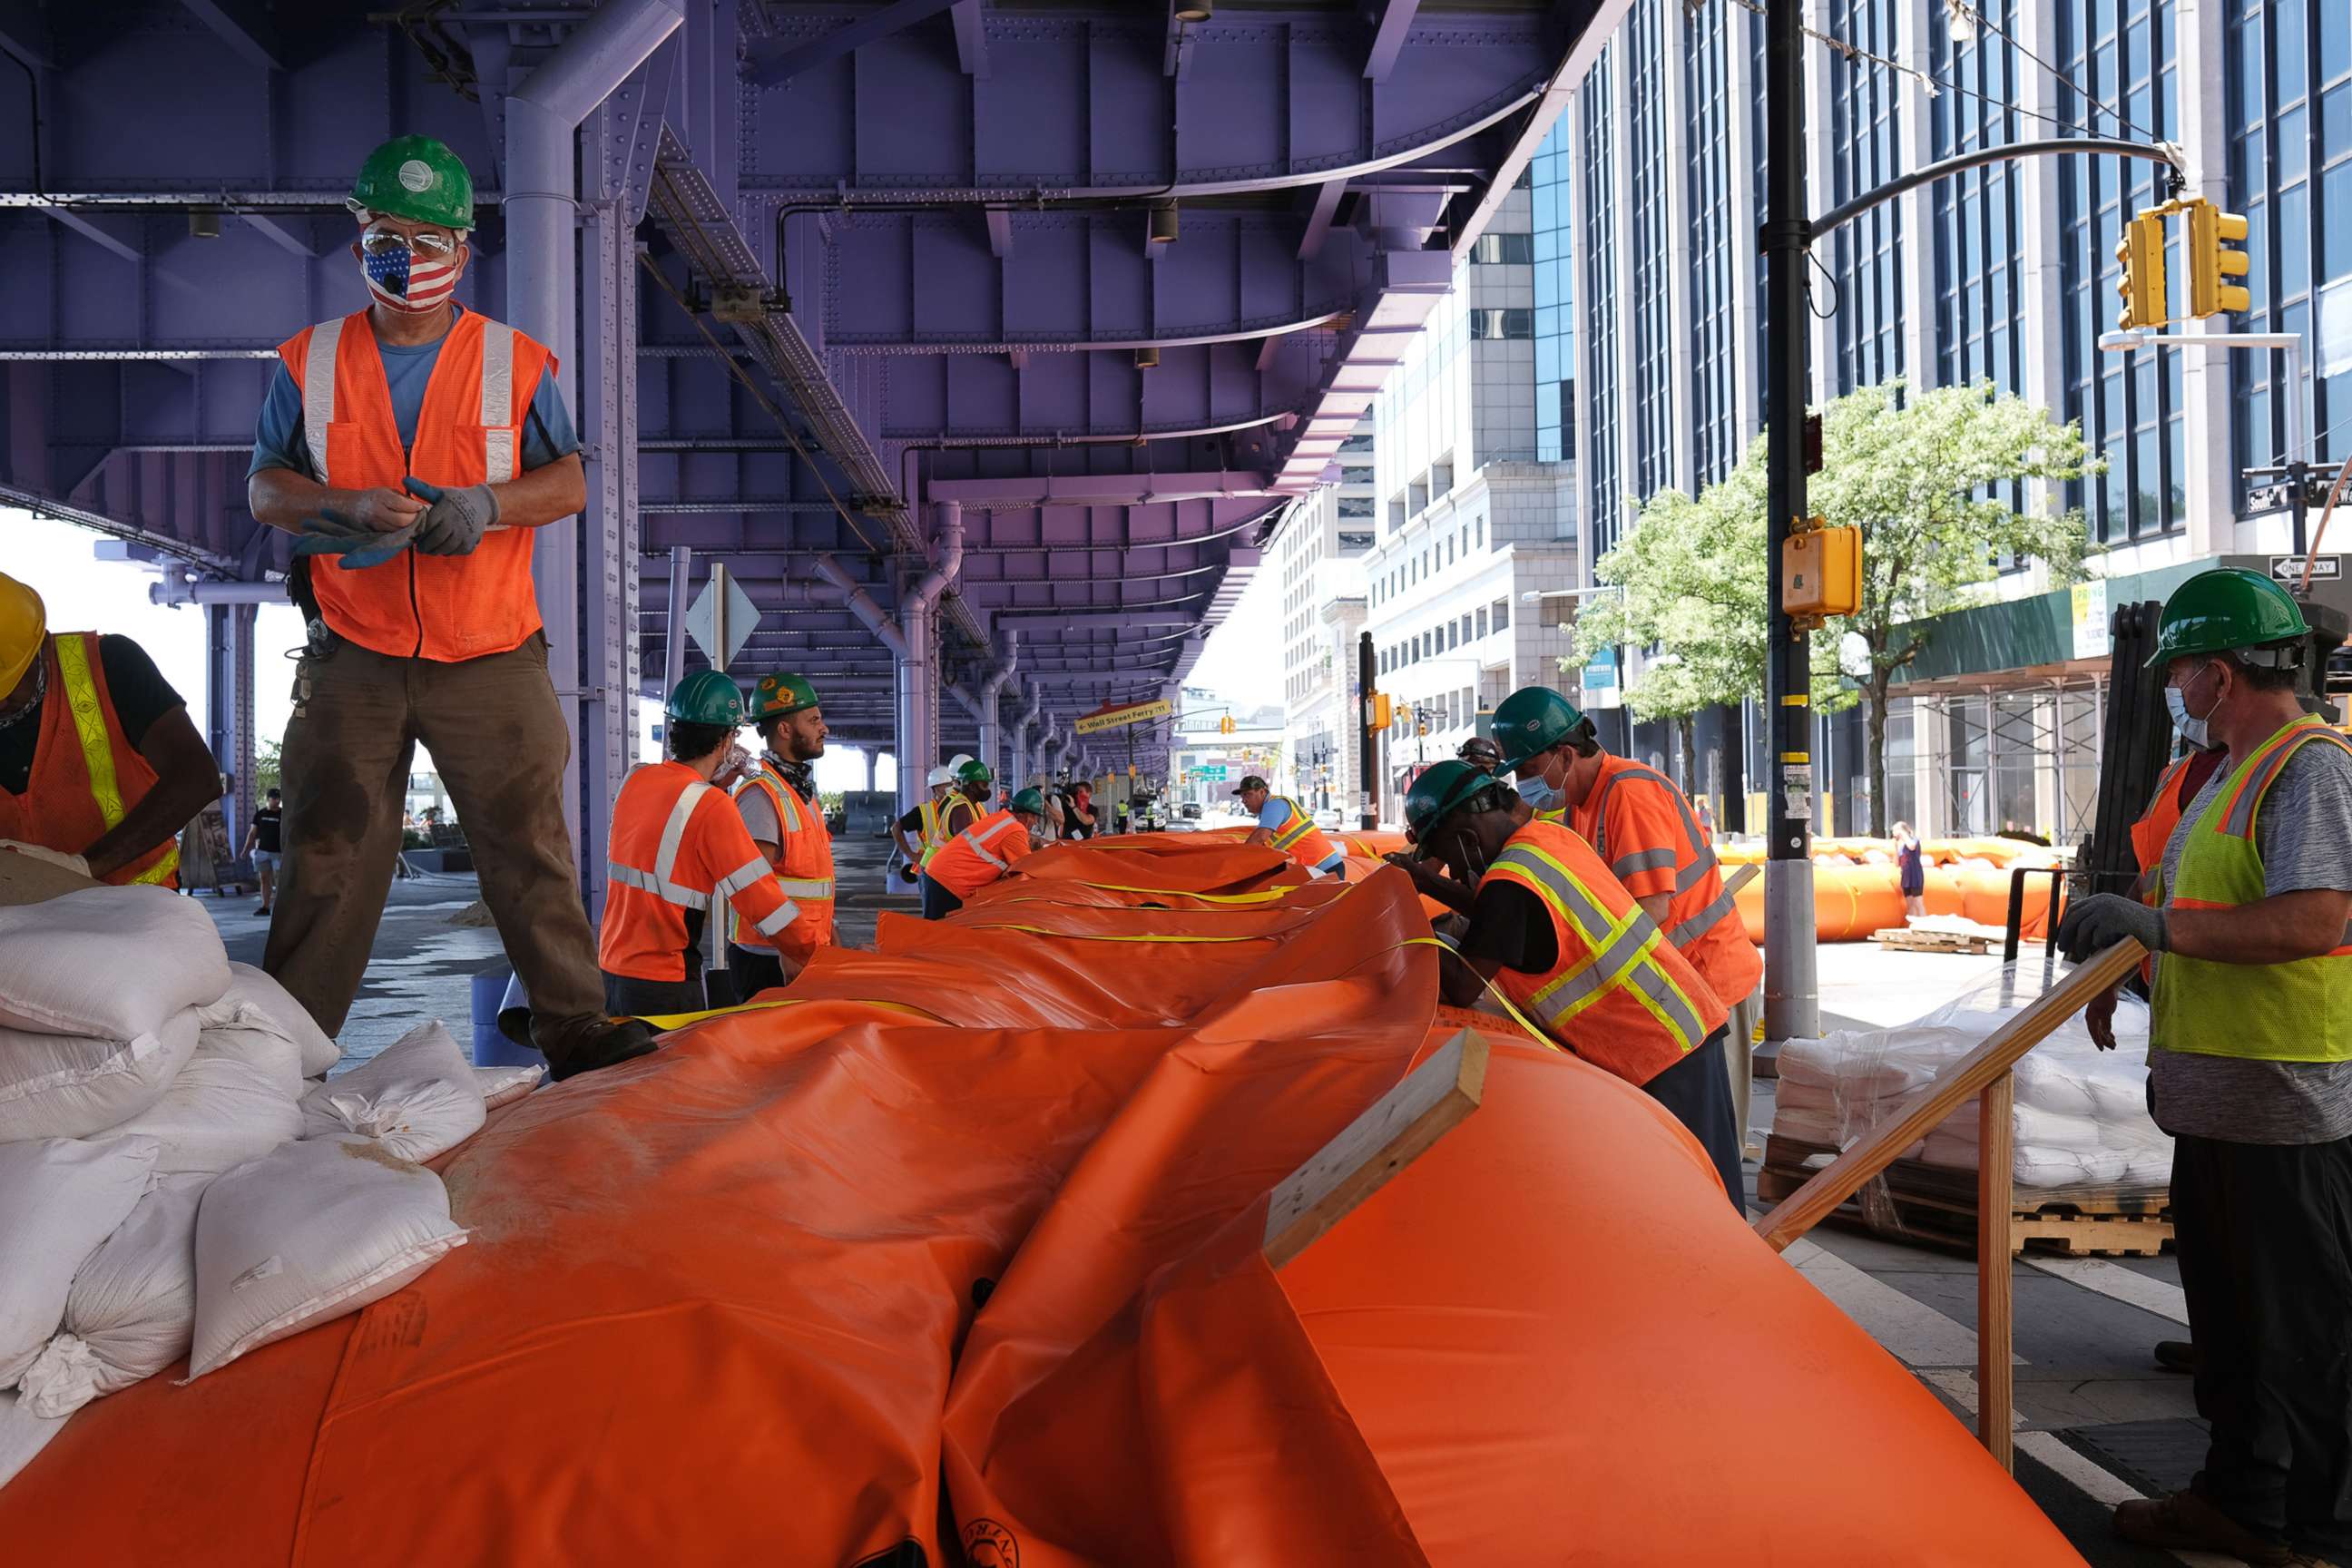 PHOTO: Workers erect temporary flood barriers in the South Street Seaport neighborhood in preparation for potential flooding and a storm surge from Tropical Storm Isaias, Aug. 3, 2020, in New York.